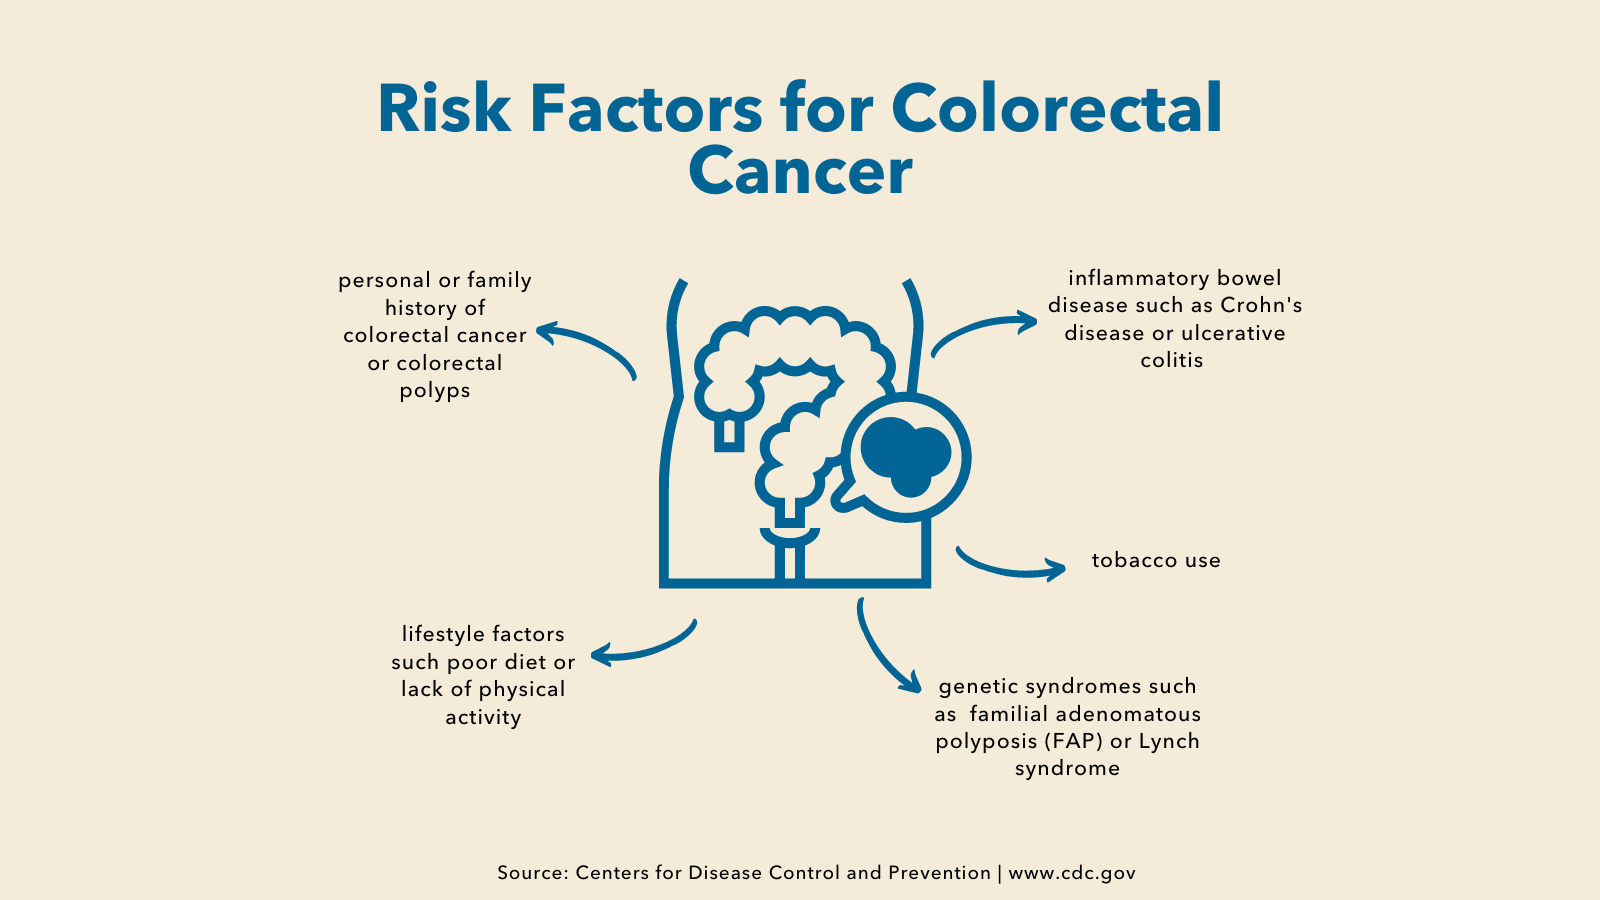 Image of colon and arrows pointing out indicating different risk factors for colorectal cancer